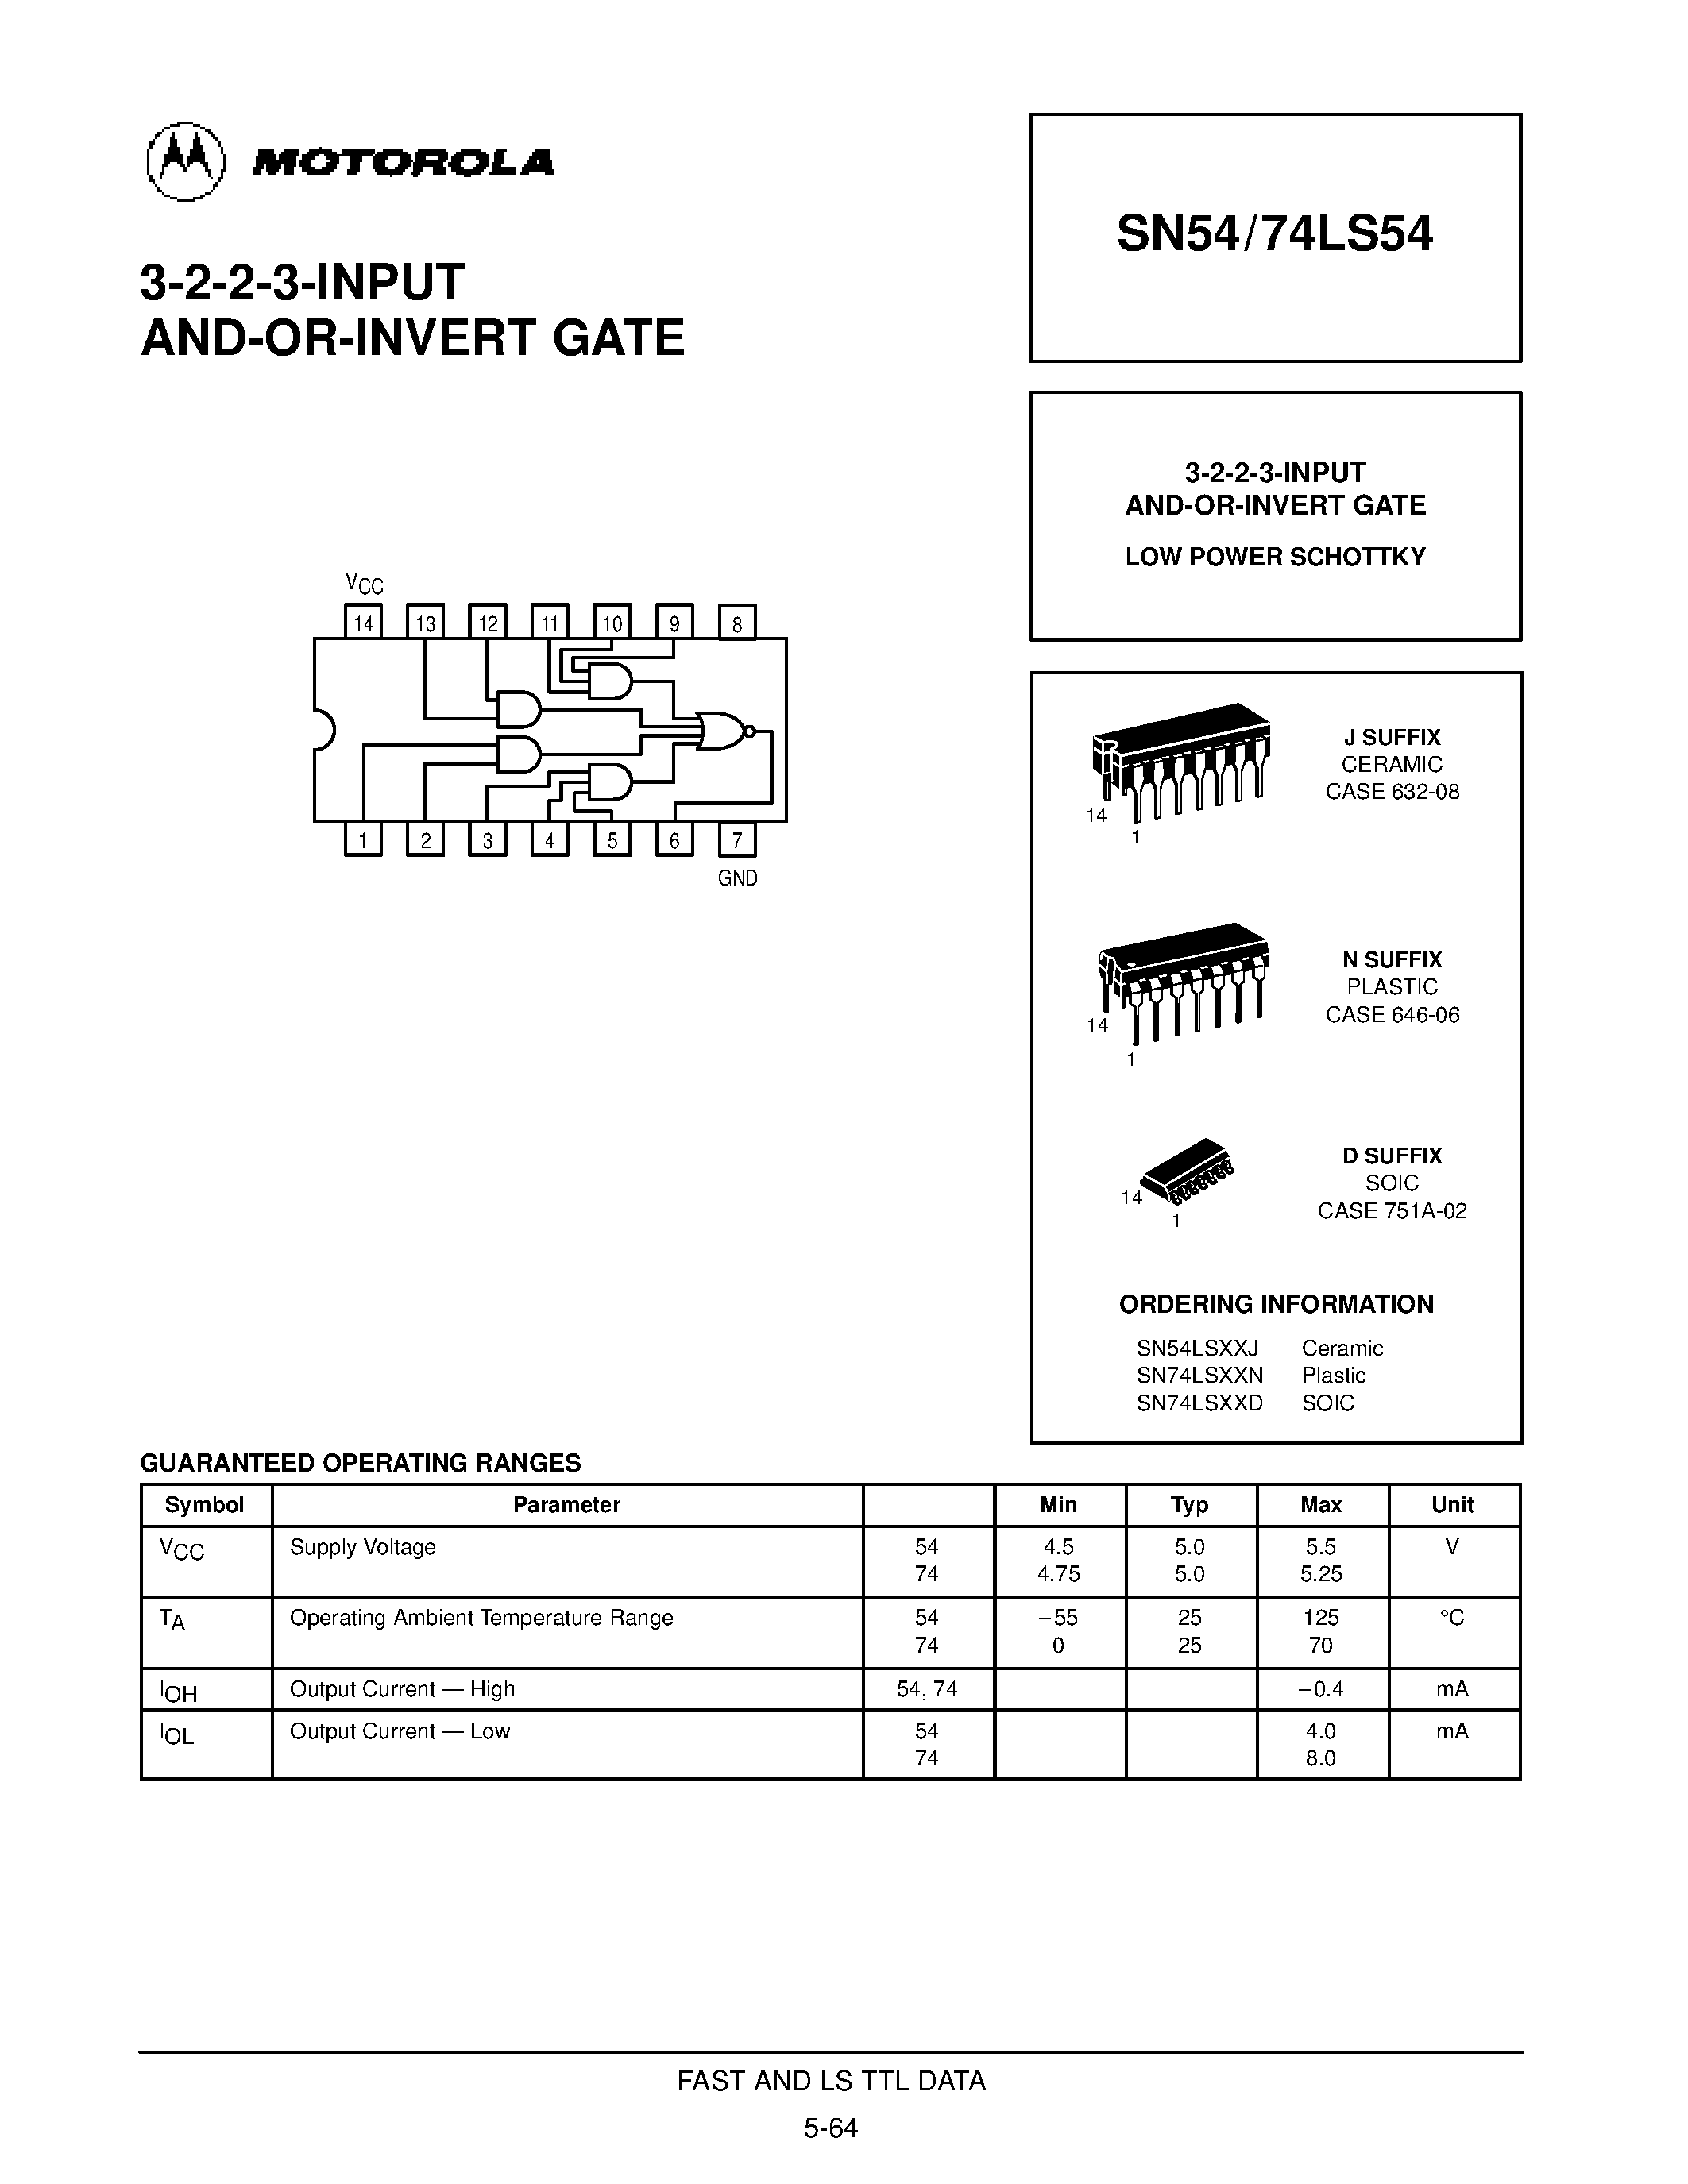 SN74LS54D-3-2-2-3-INPUT AND-OR-INVERT GATE.